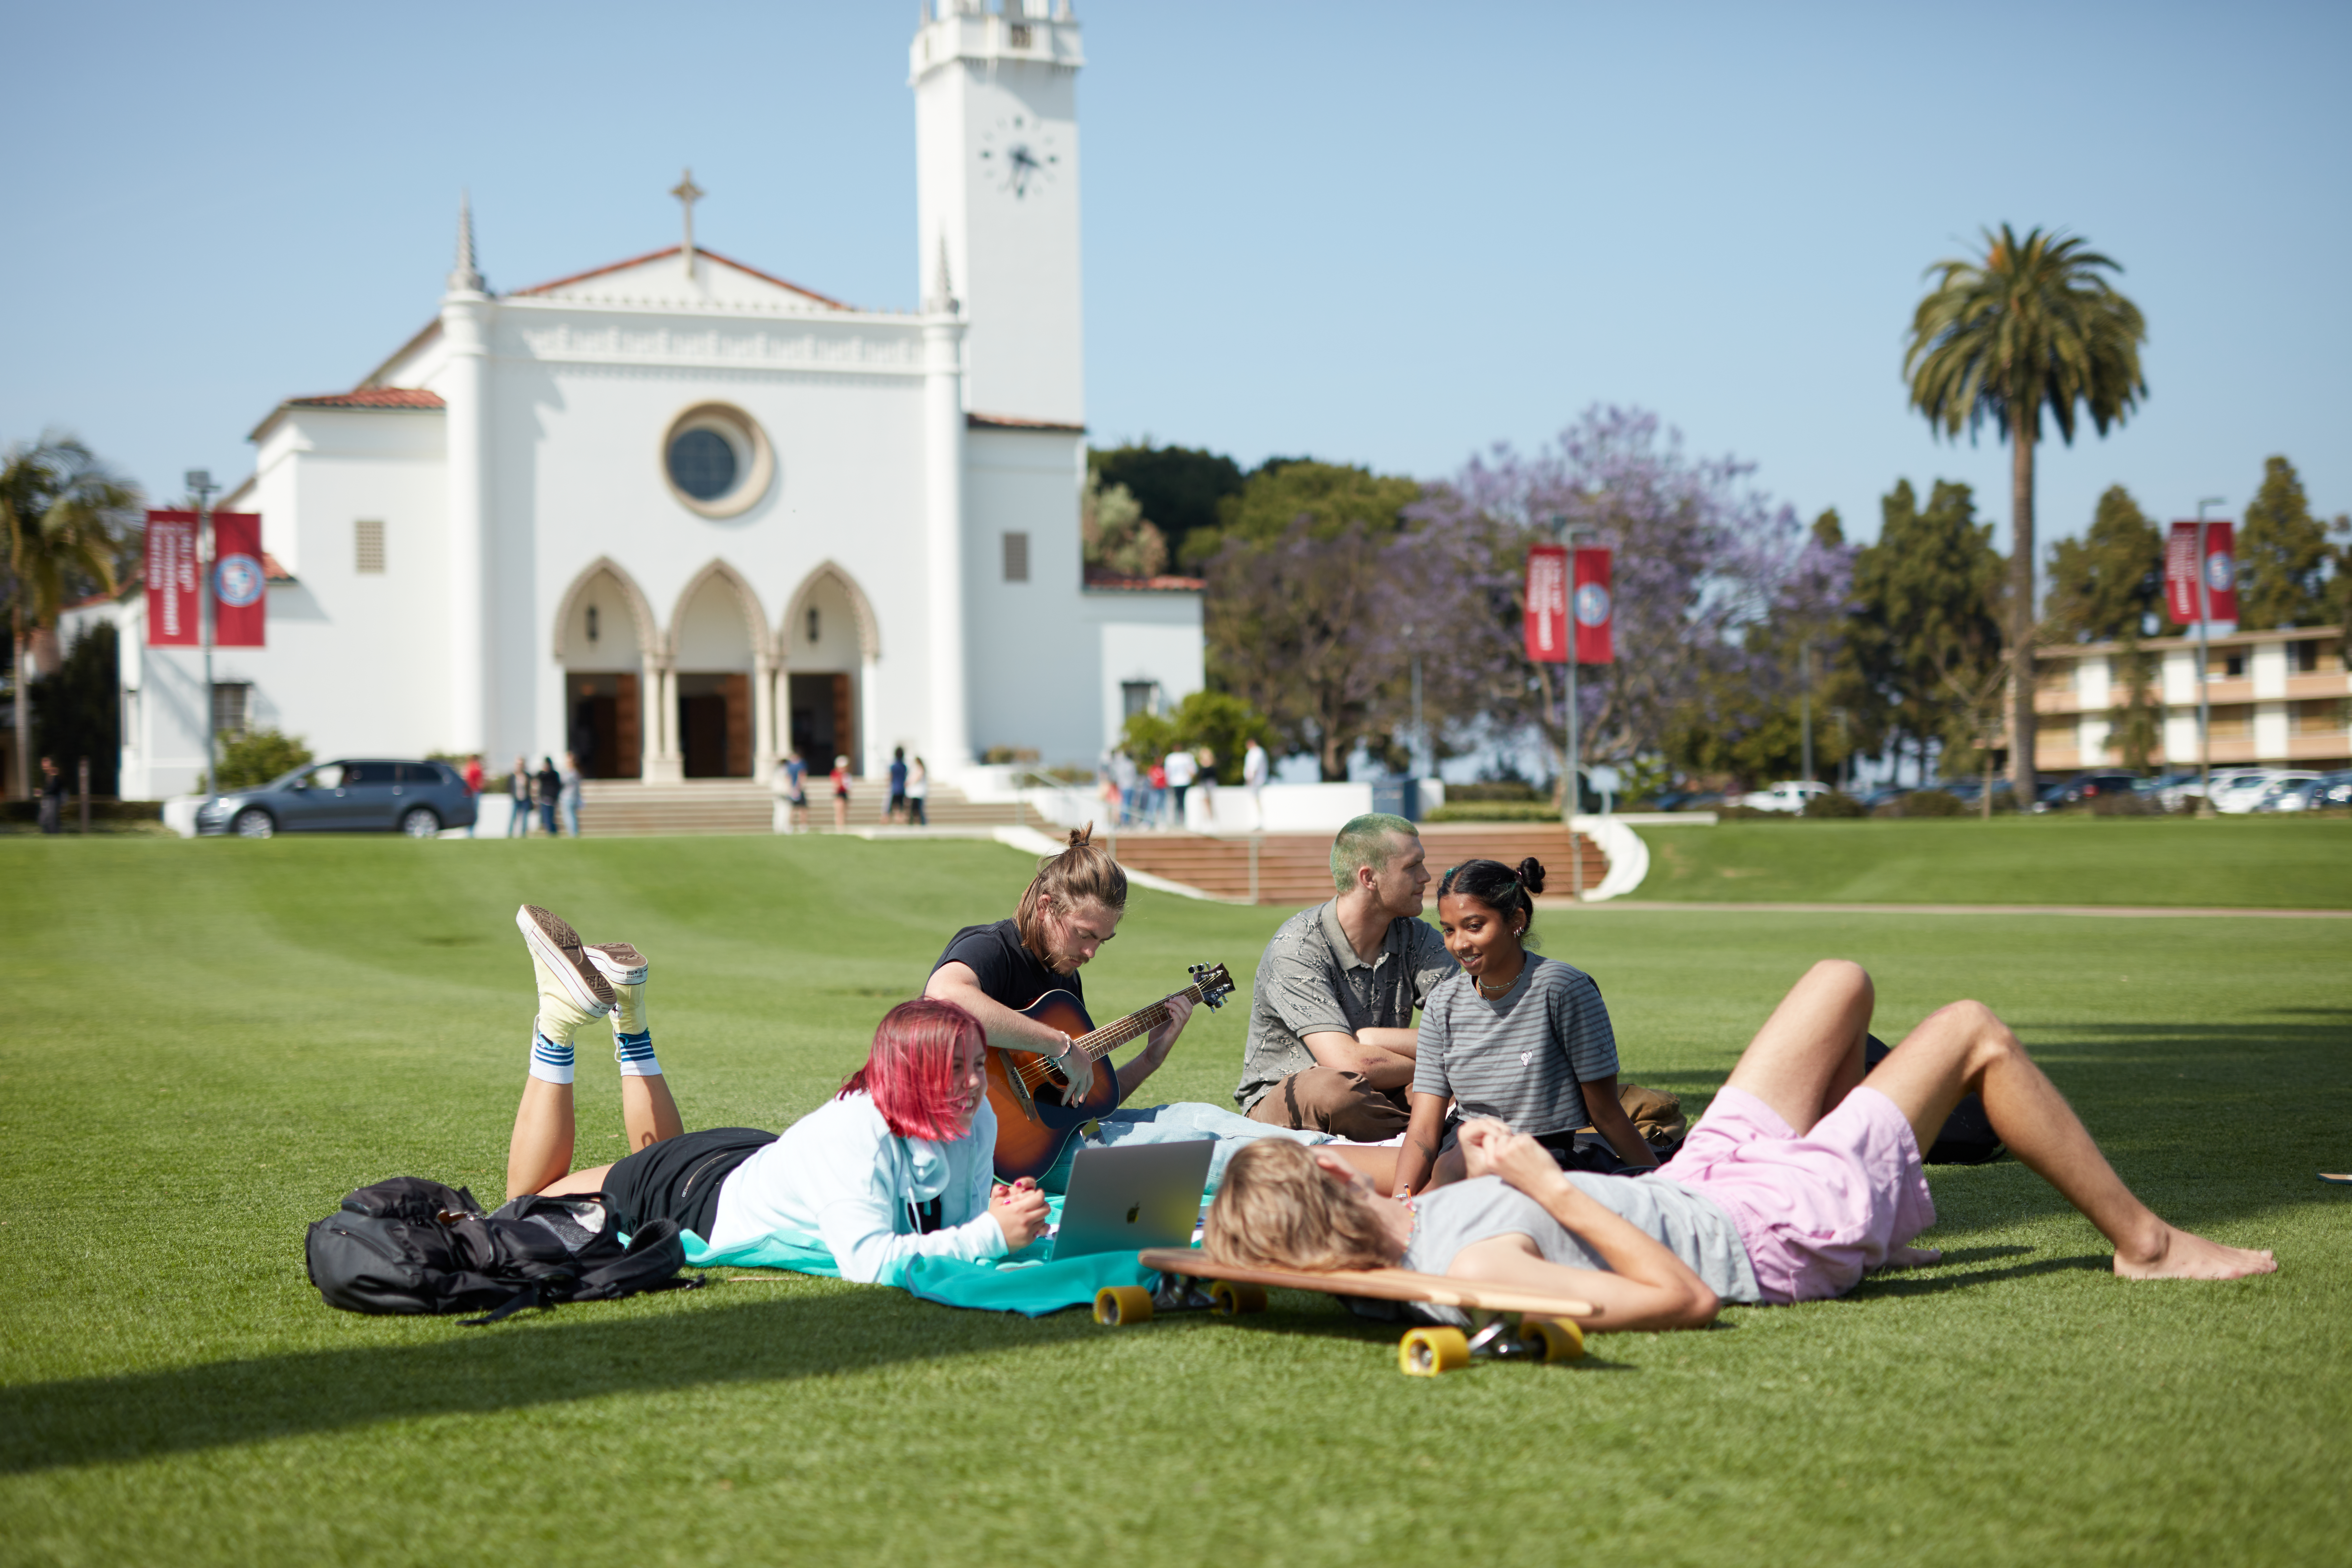 Students gather on LMU Campus with chapel in background